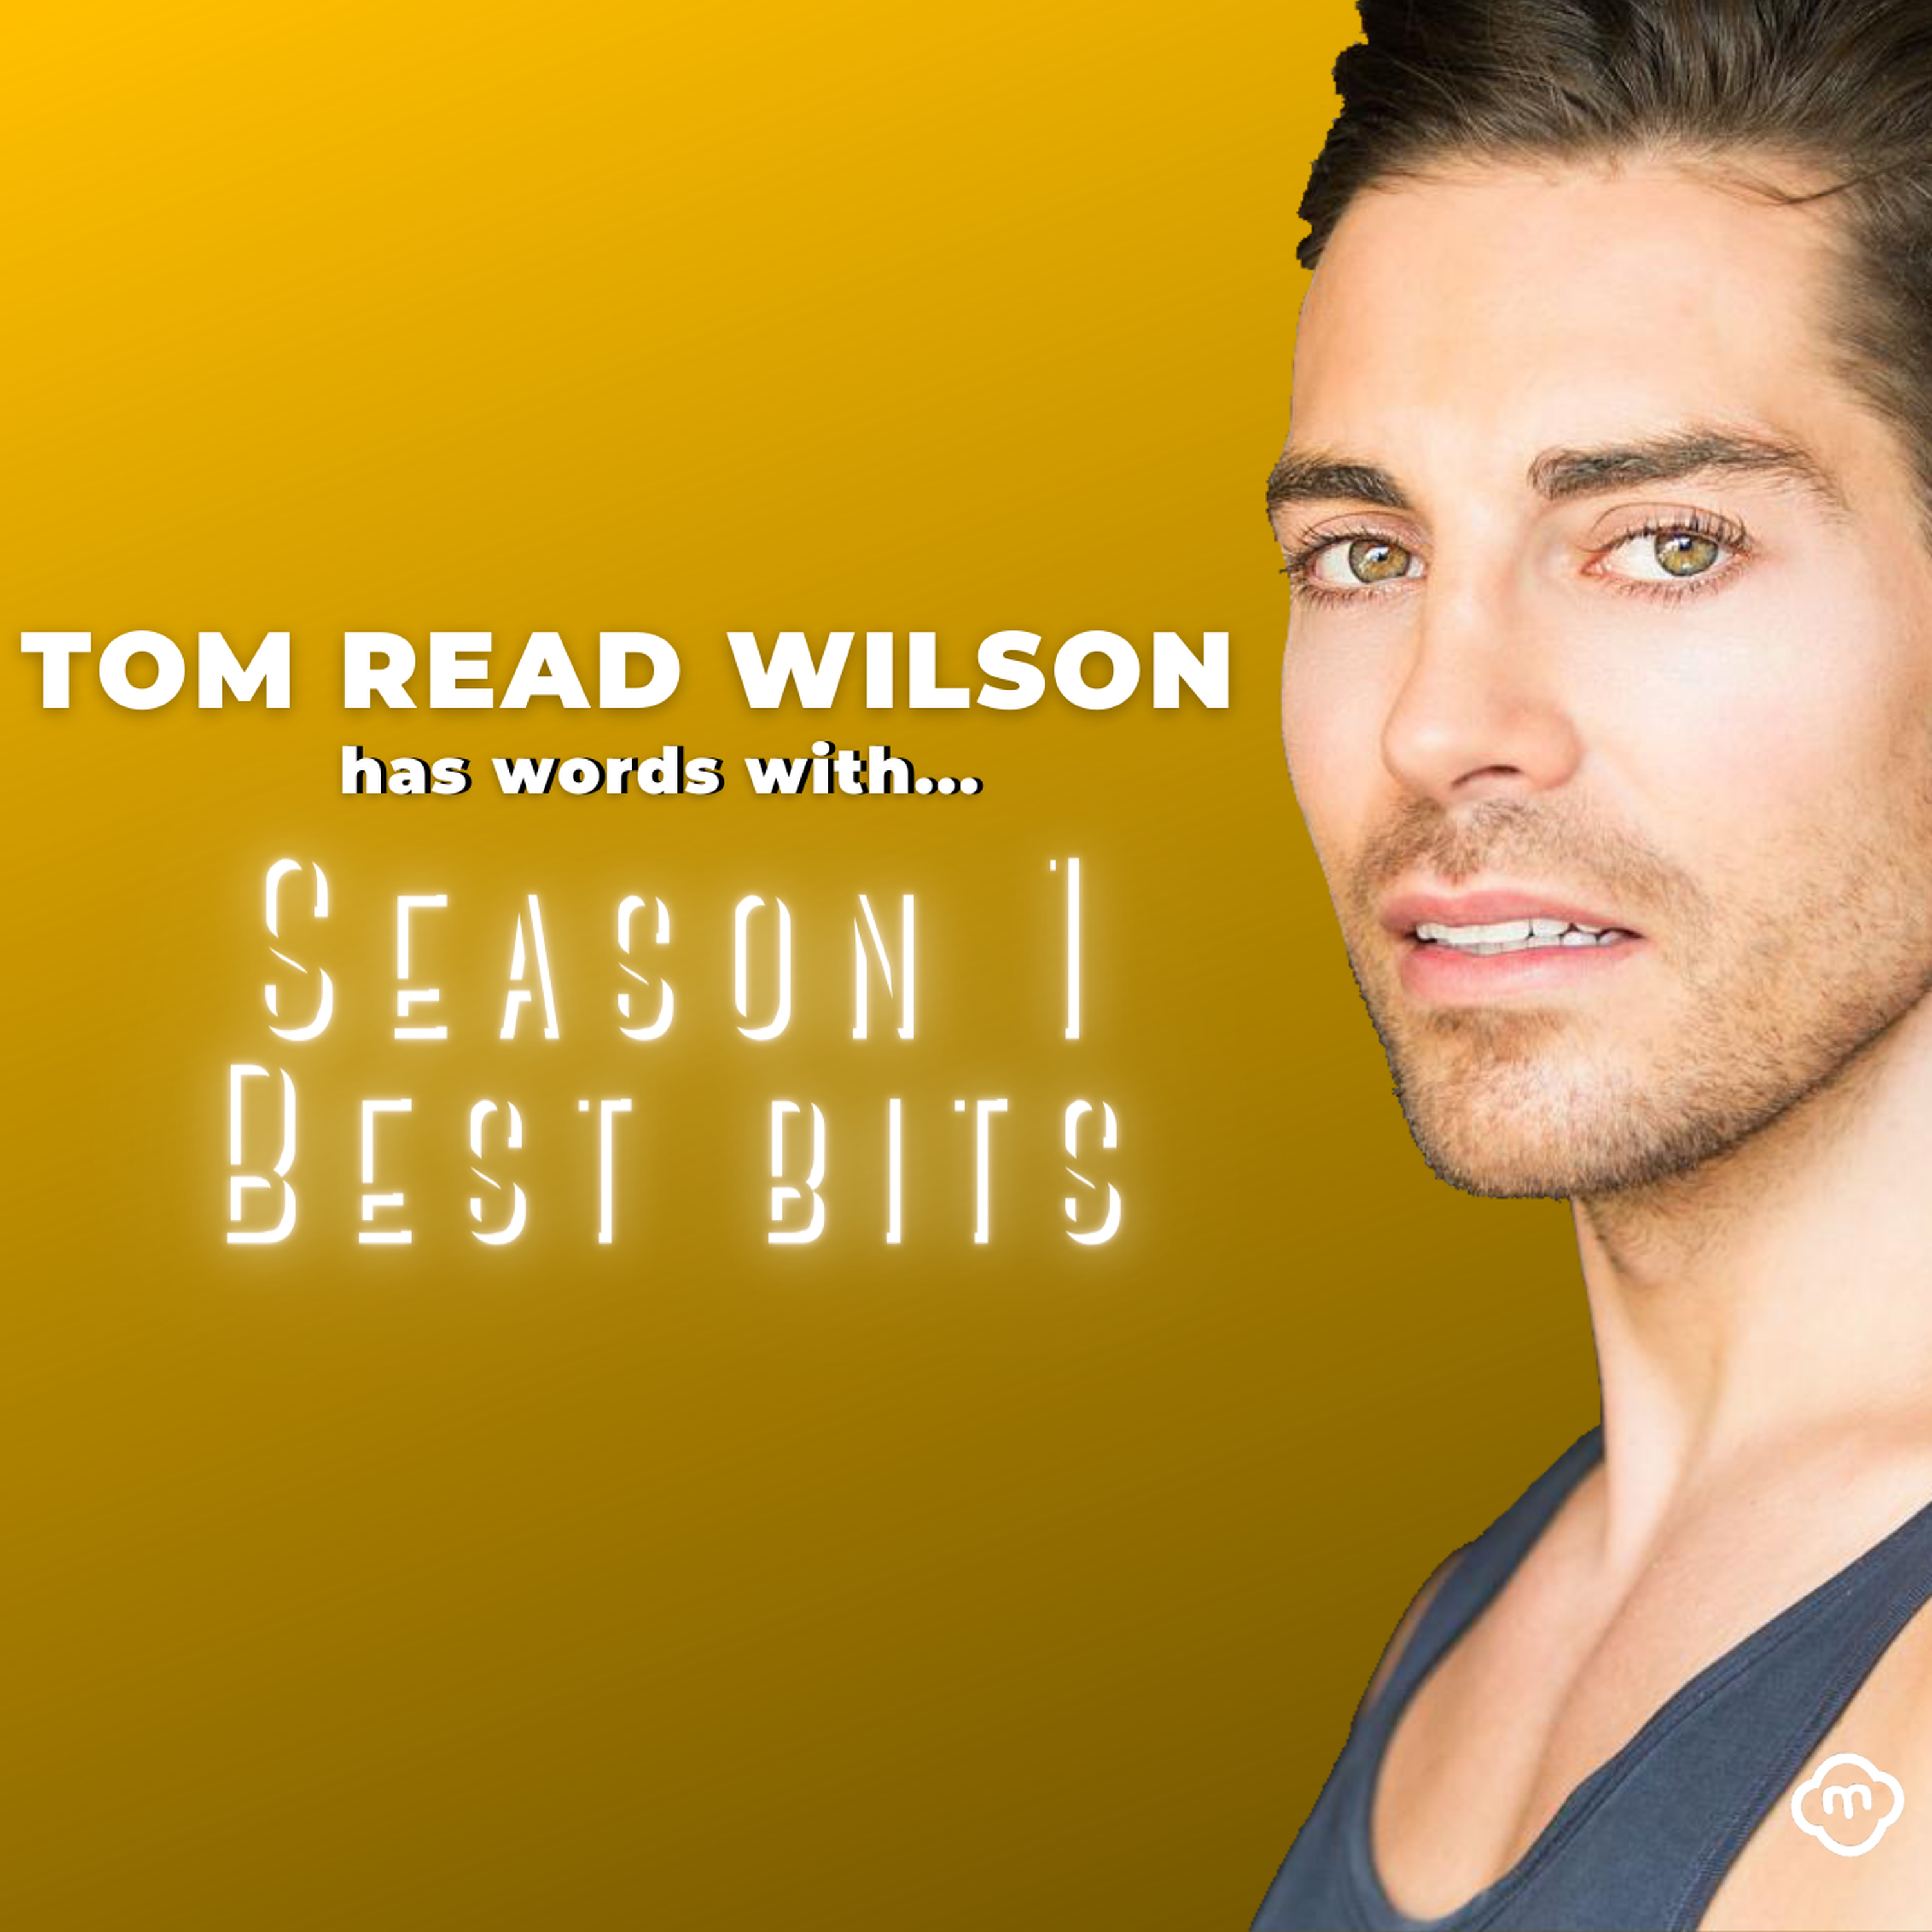 Tom Read Wilson has words with... Best Bits